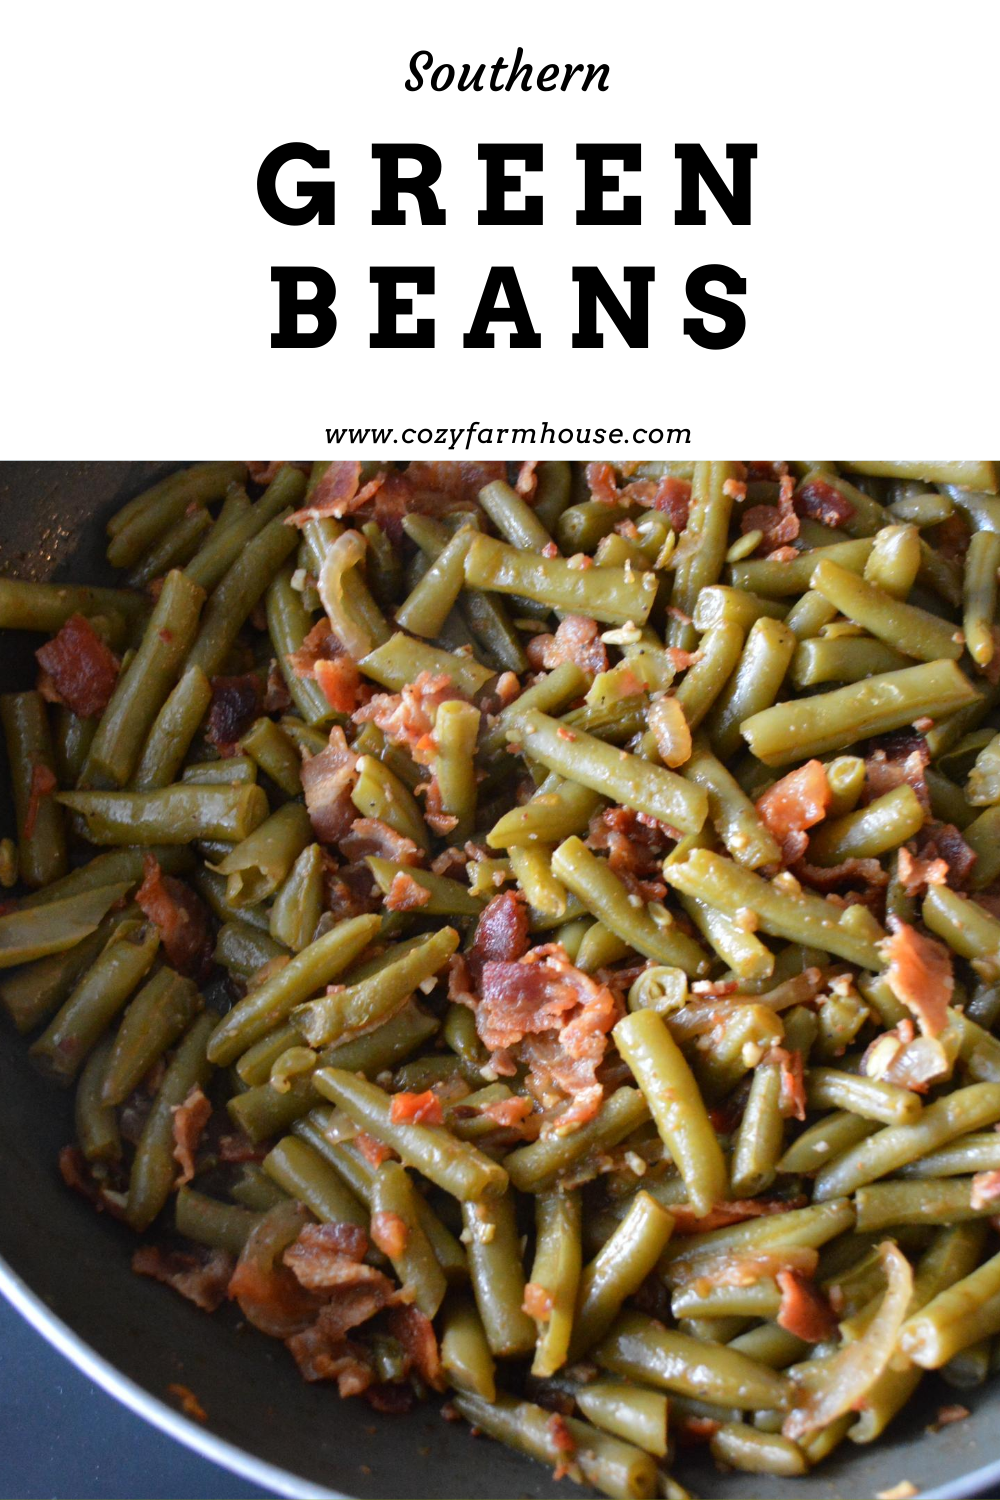 Southern green beans